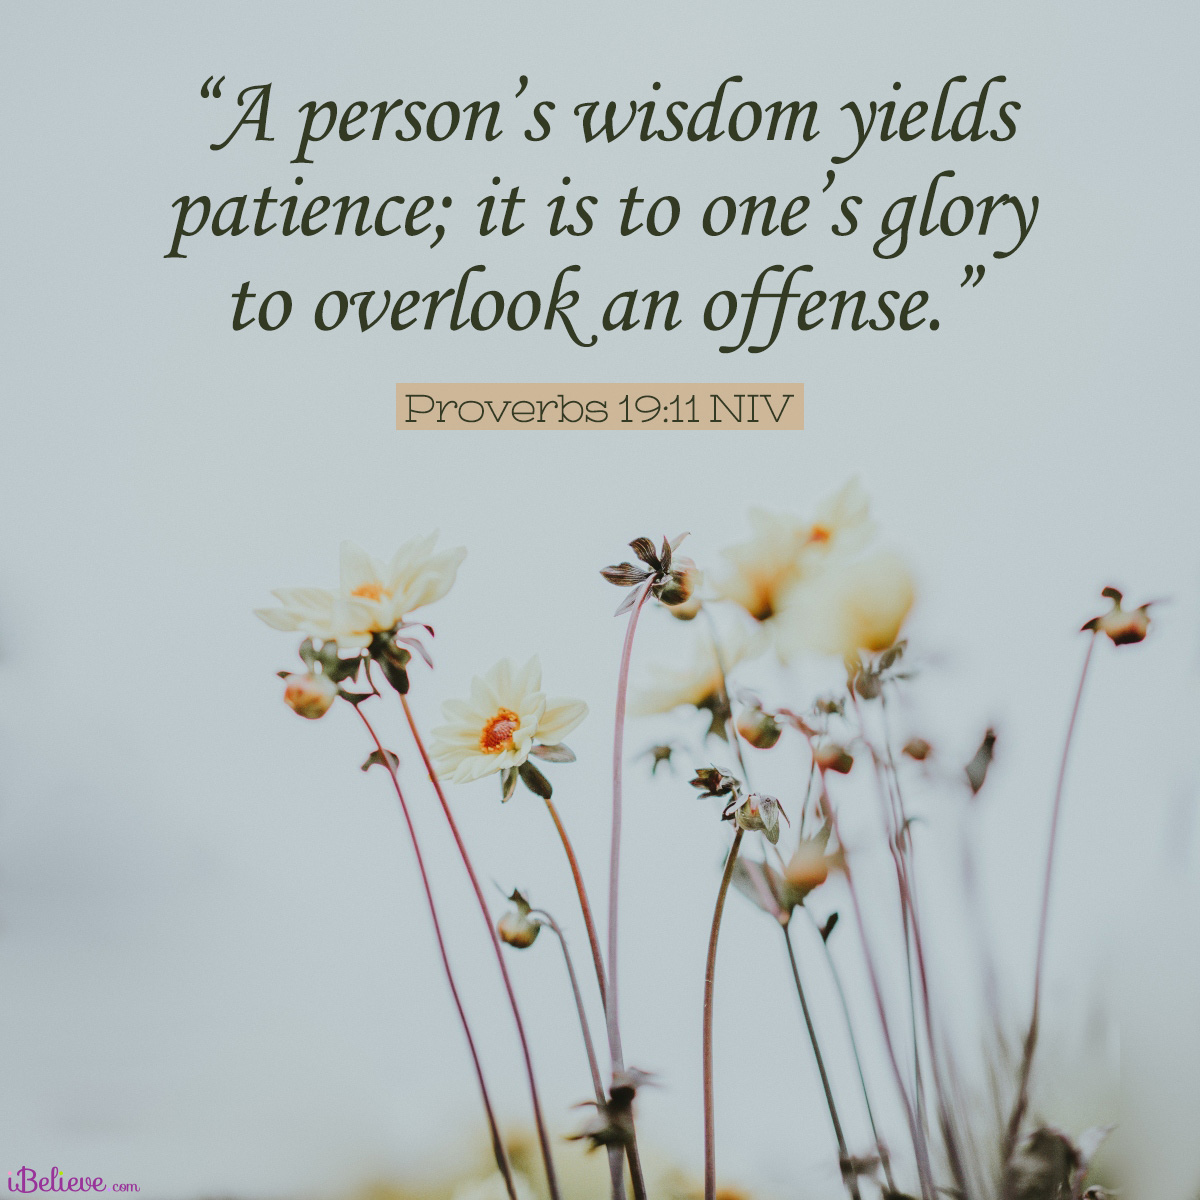 Proverbs 19:11, inspirational image